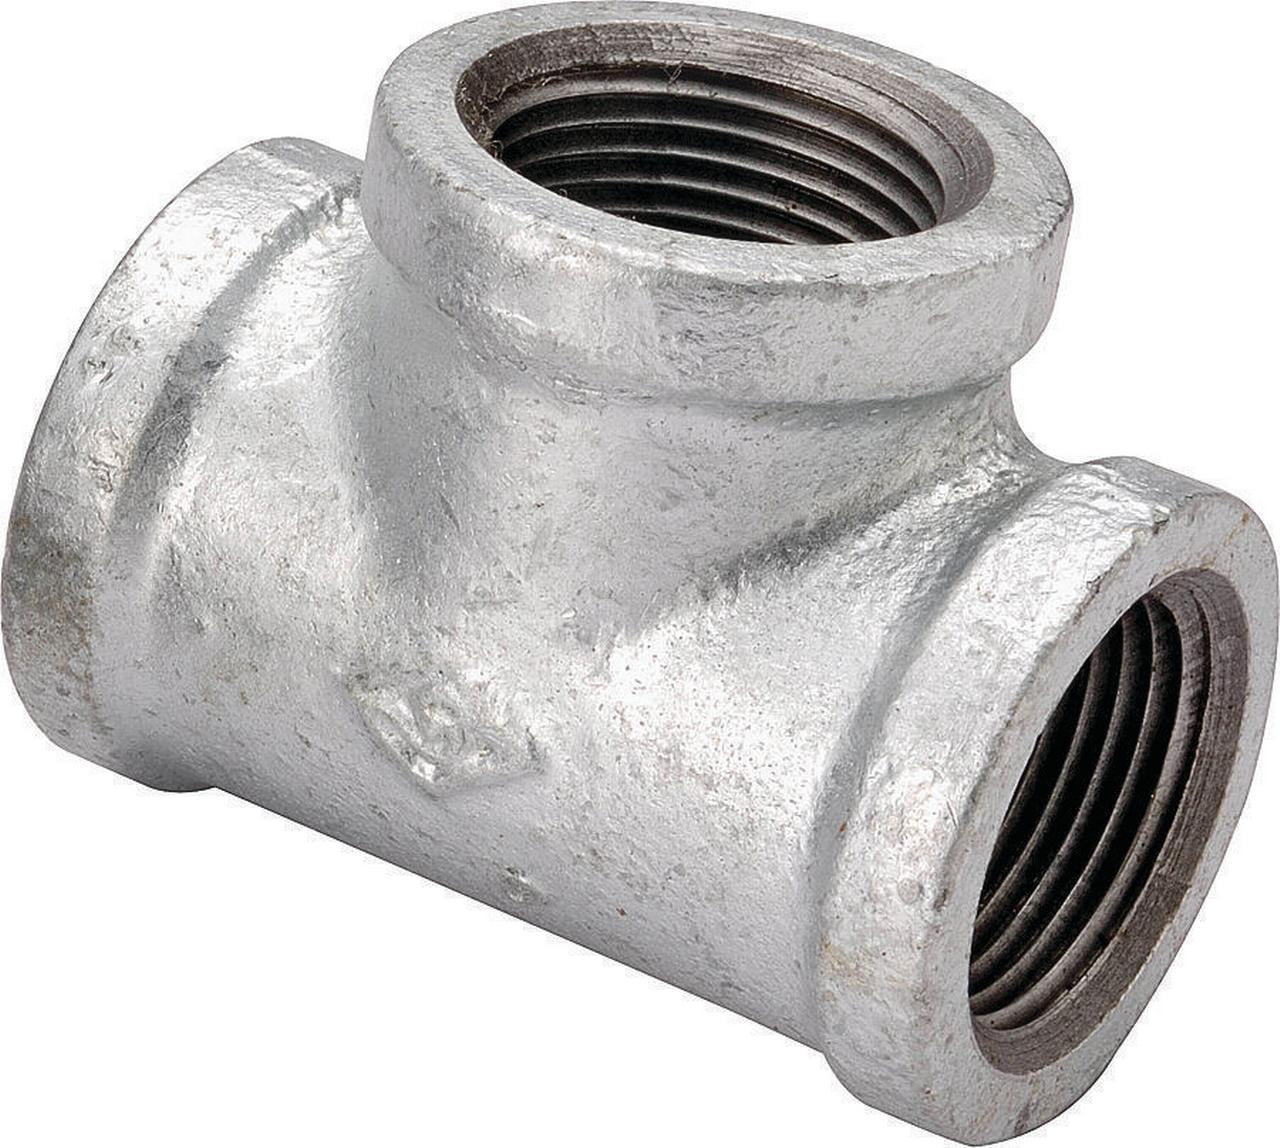 Malleable Iron Equal Bend 45 Degree Fittings with Male and Female BSP Threads